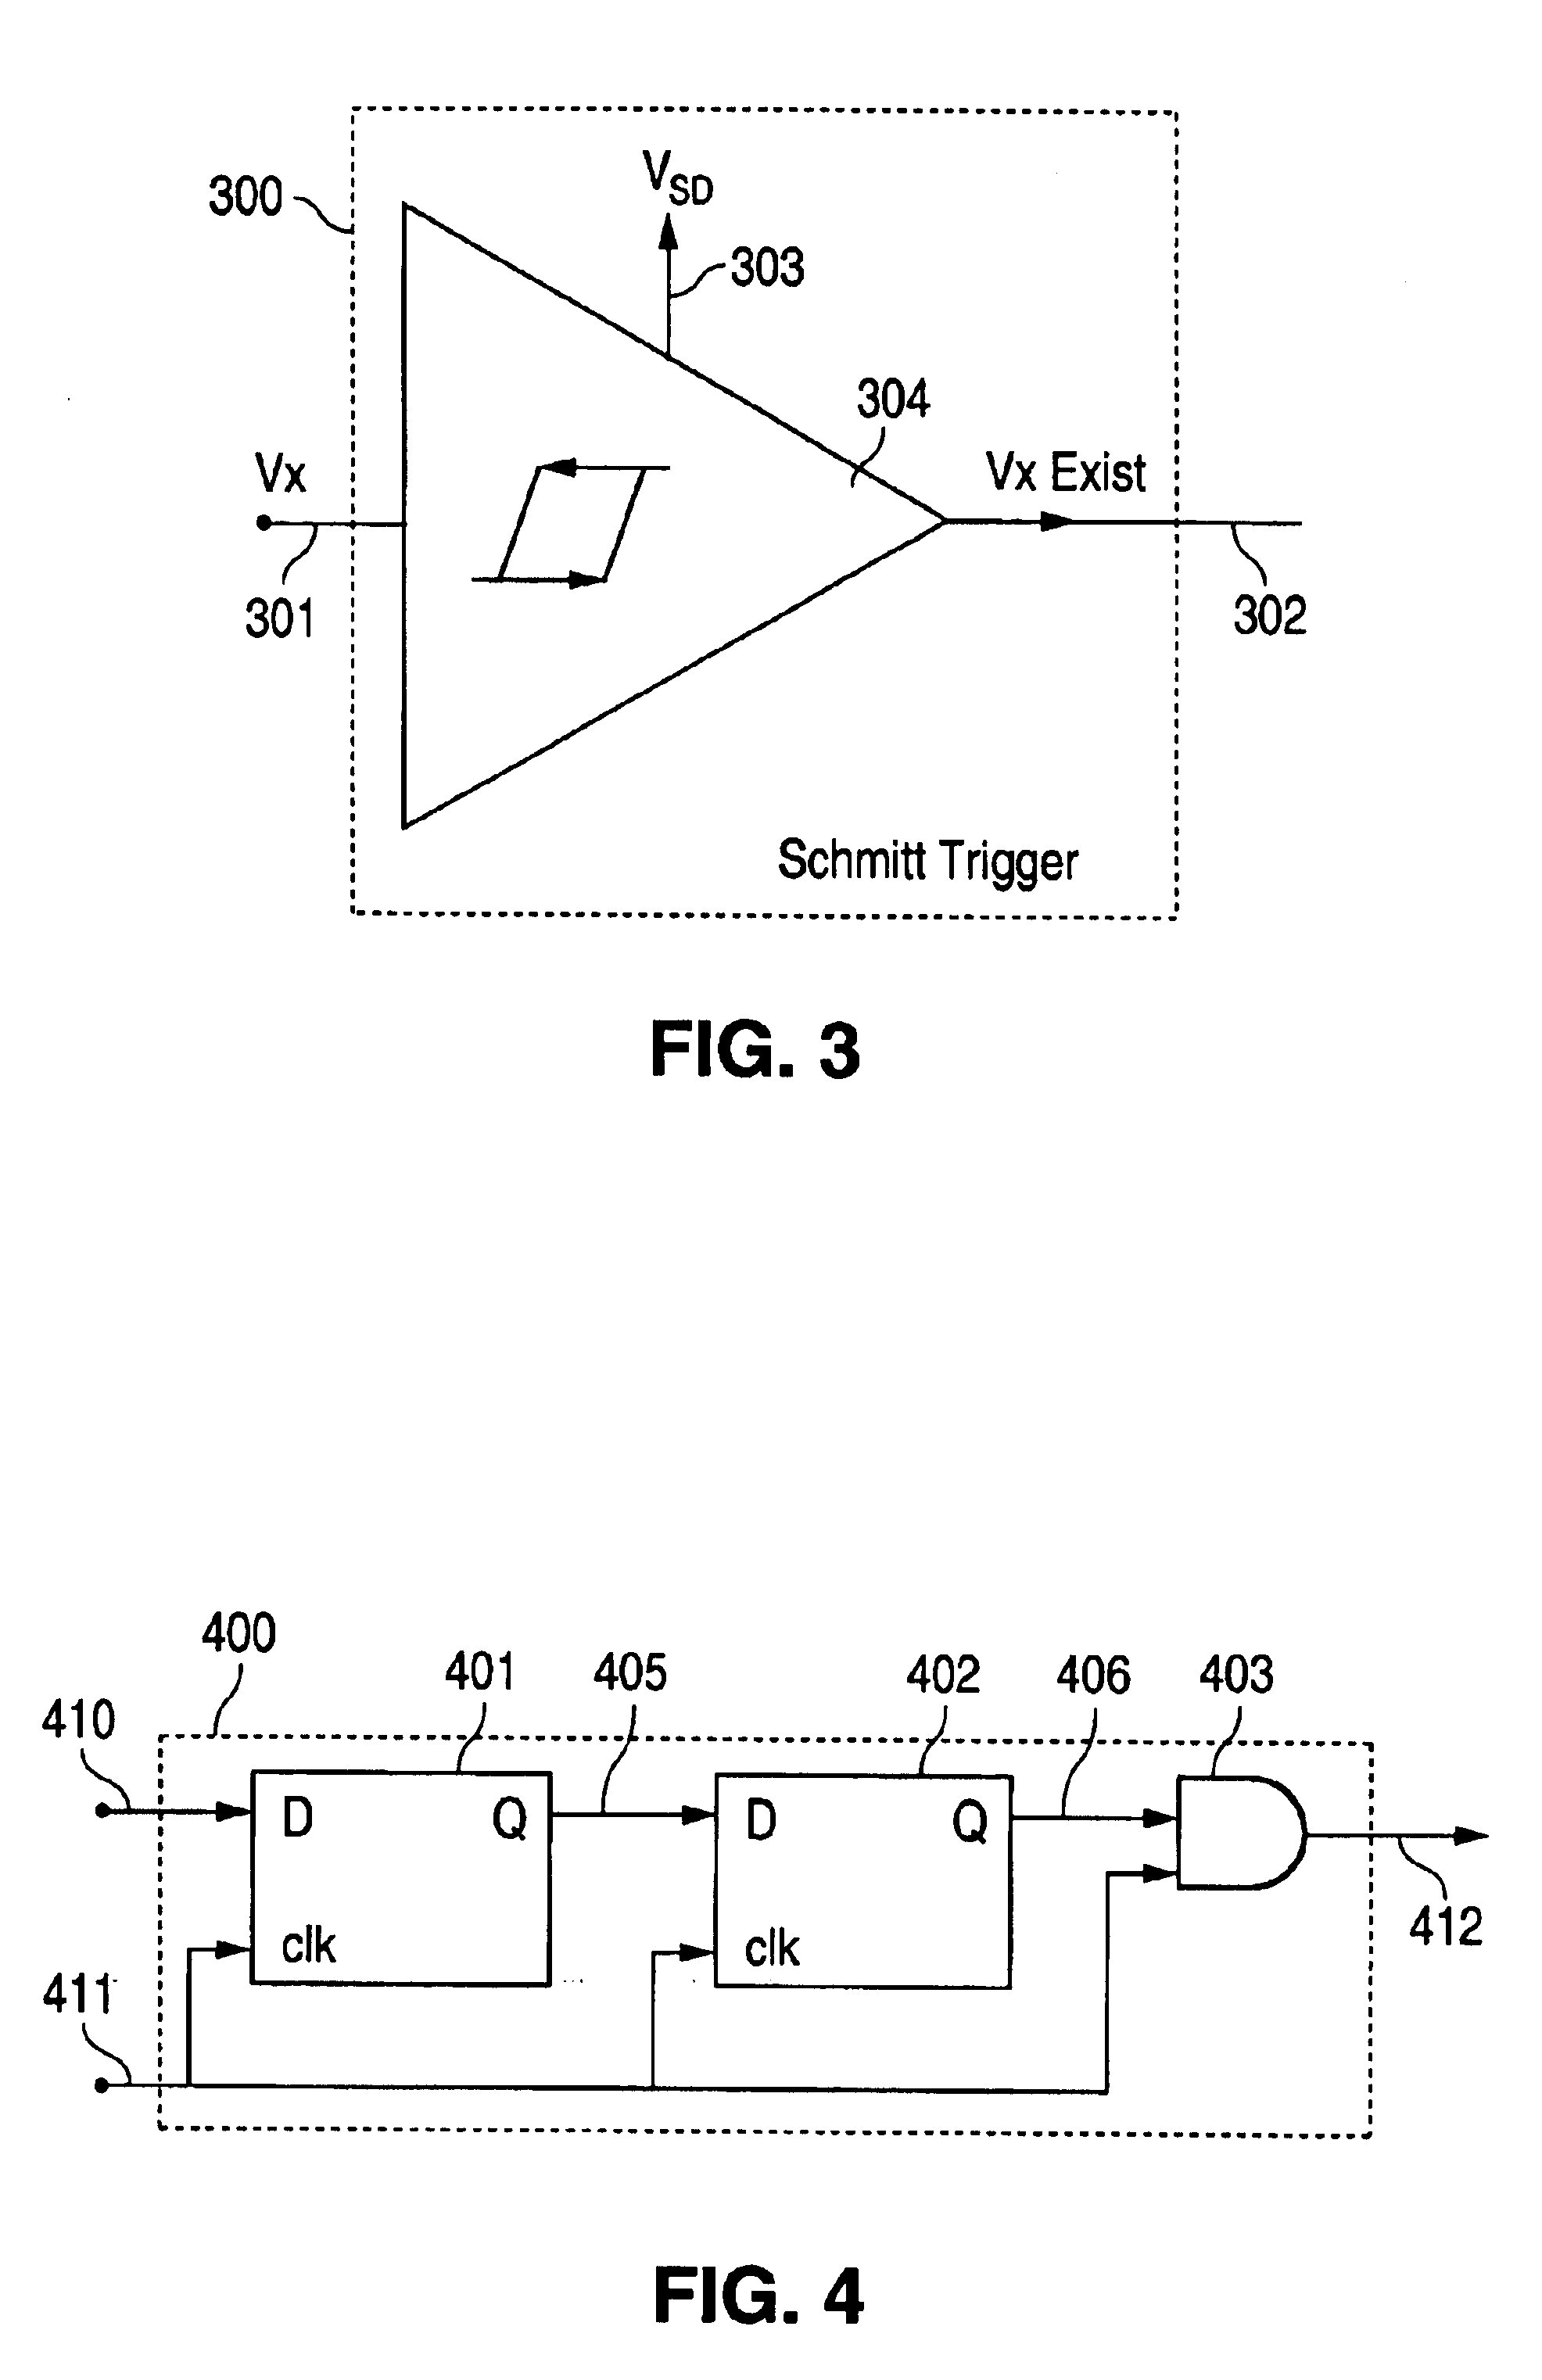 Apparatus and method for providing multiple power supply voltages to an integrated circuit